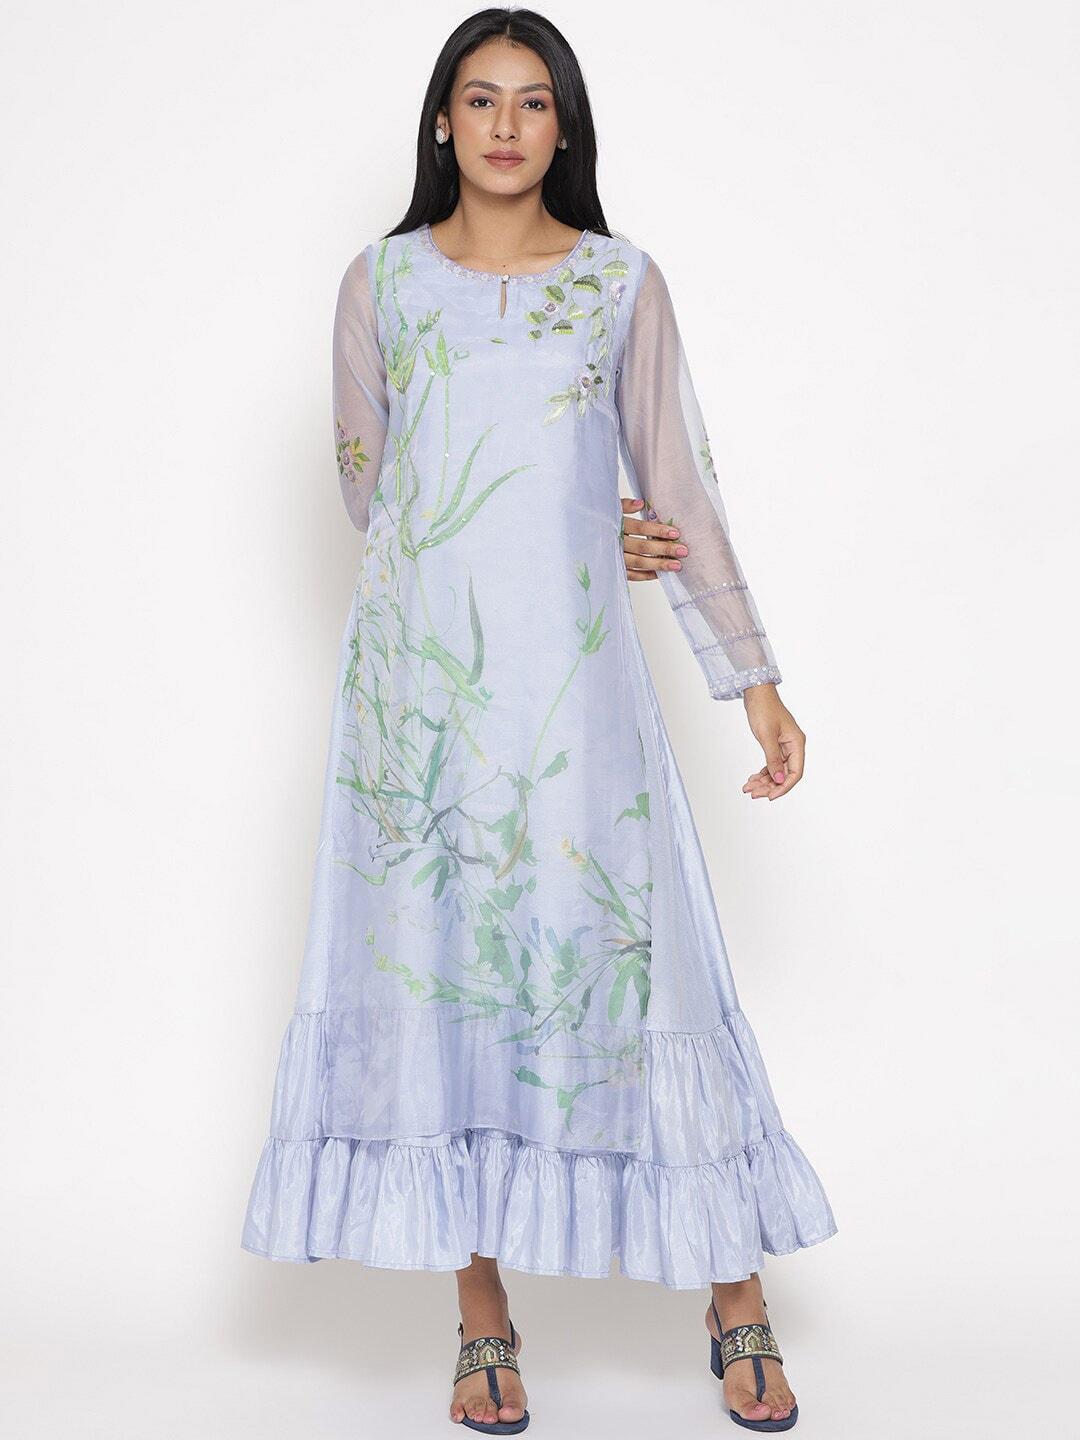 wishful-women-light-purple-floral-printed-and-embroidered-keyhole-neck-ethnic-maxi-dress